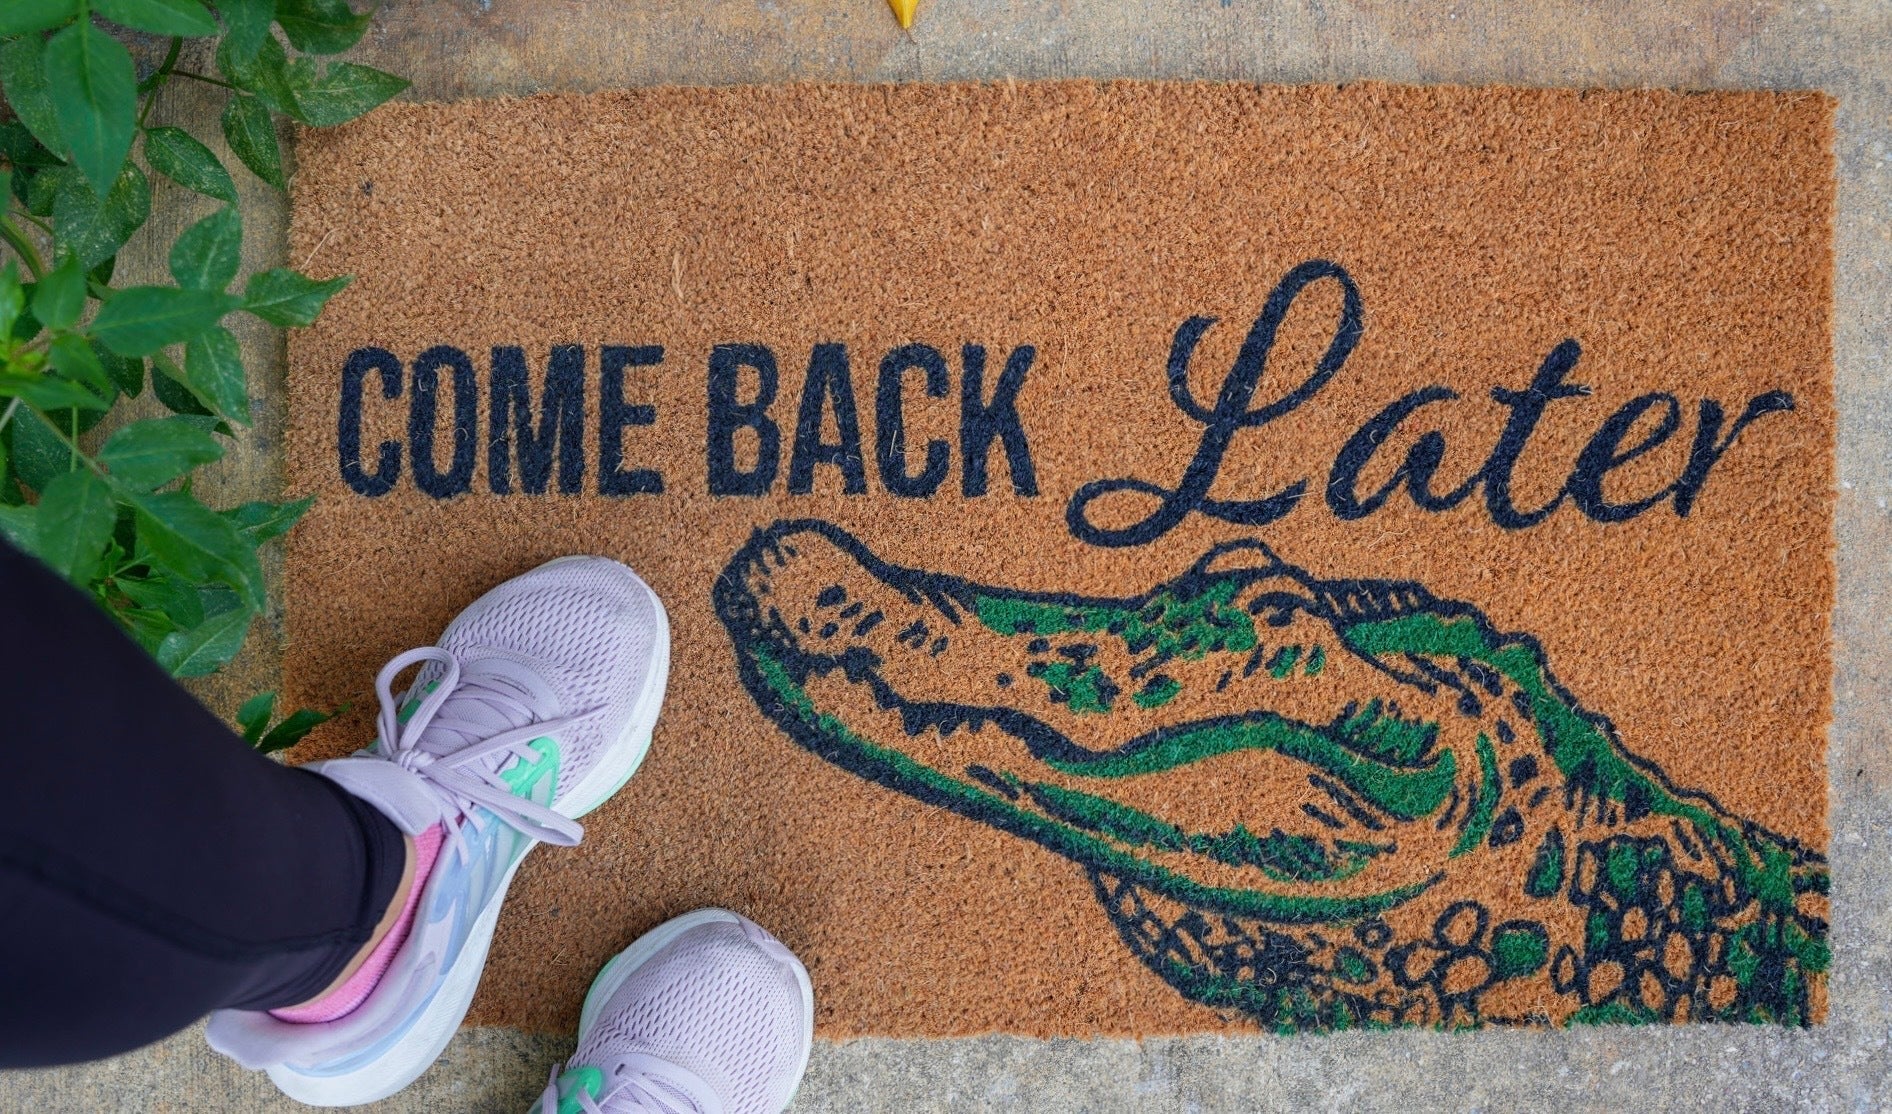 Come Back Later Doormat - Dirty Coast Press